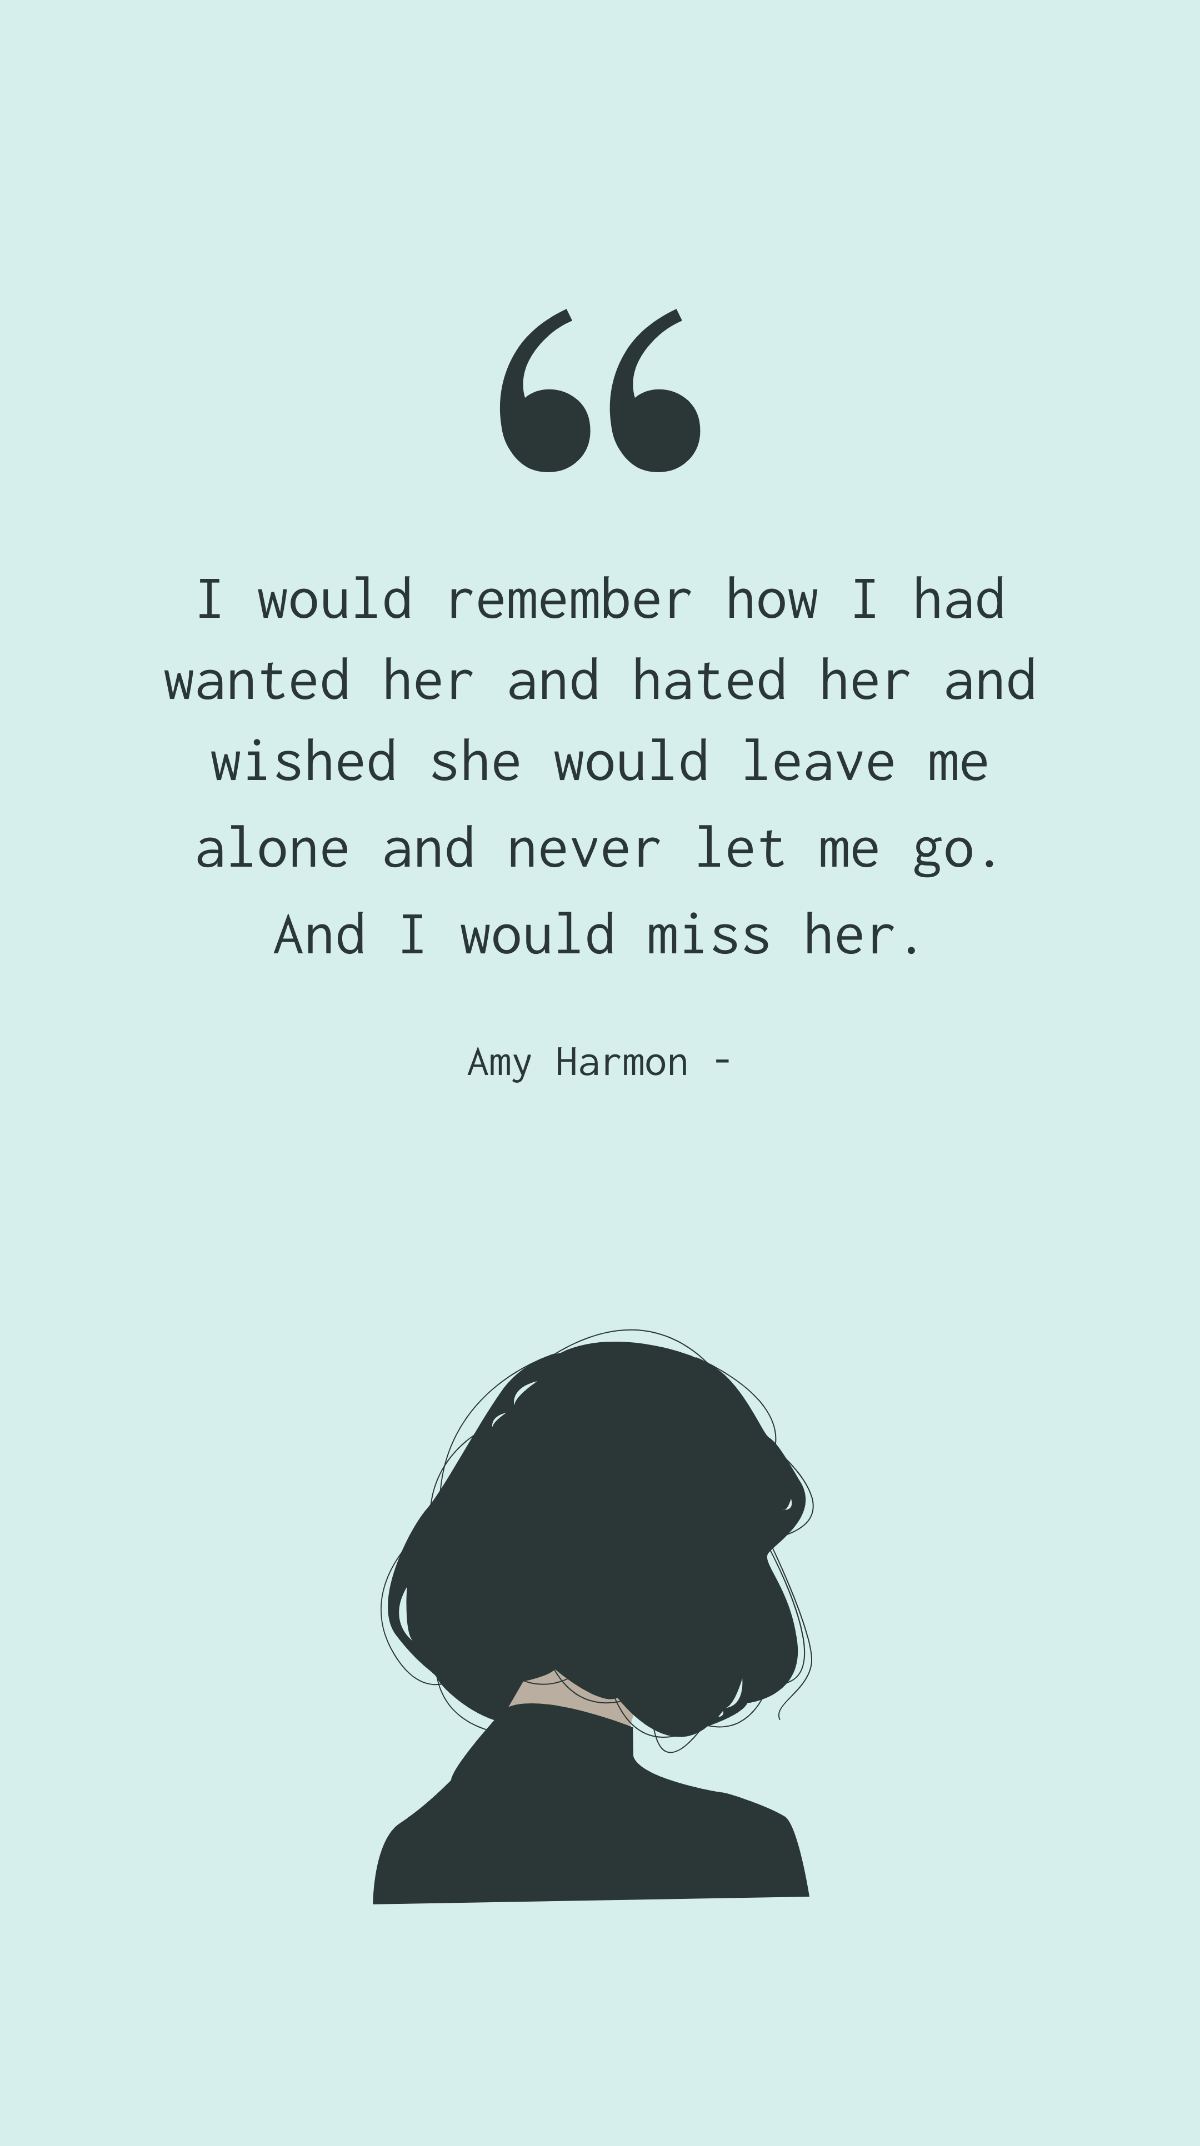 Amy Harmon - I would remember how I had wanted her and hated her and wished she would leave me alone and never let me go. And I would miss her. Template